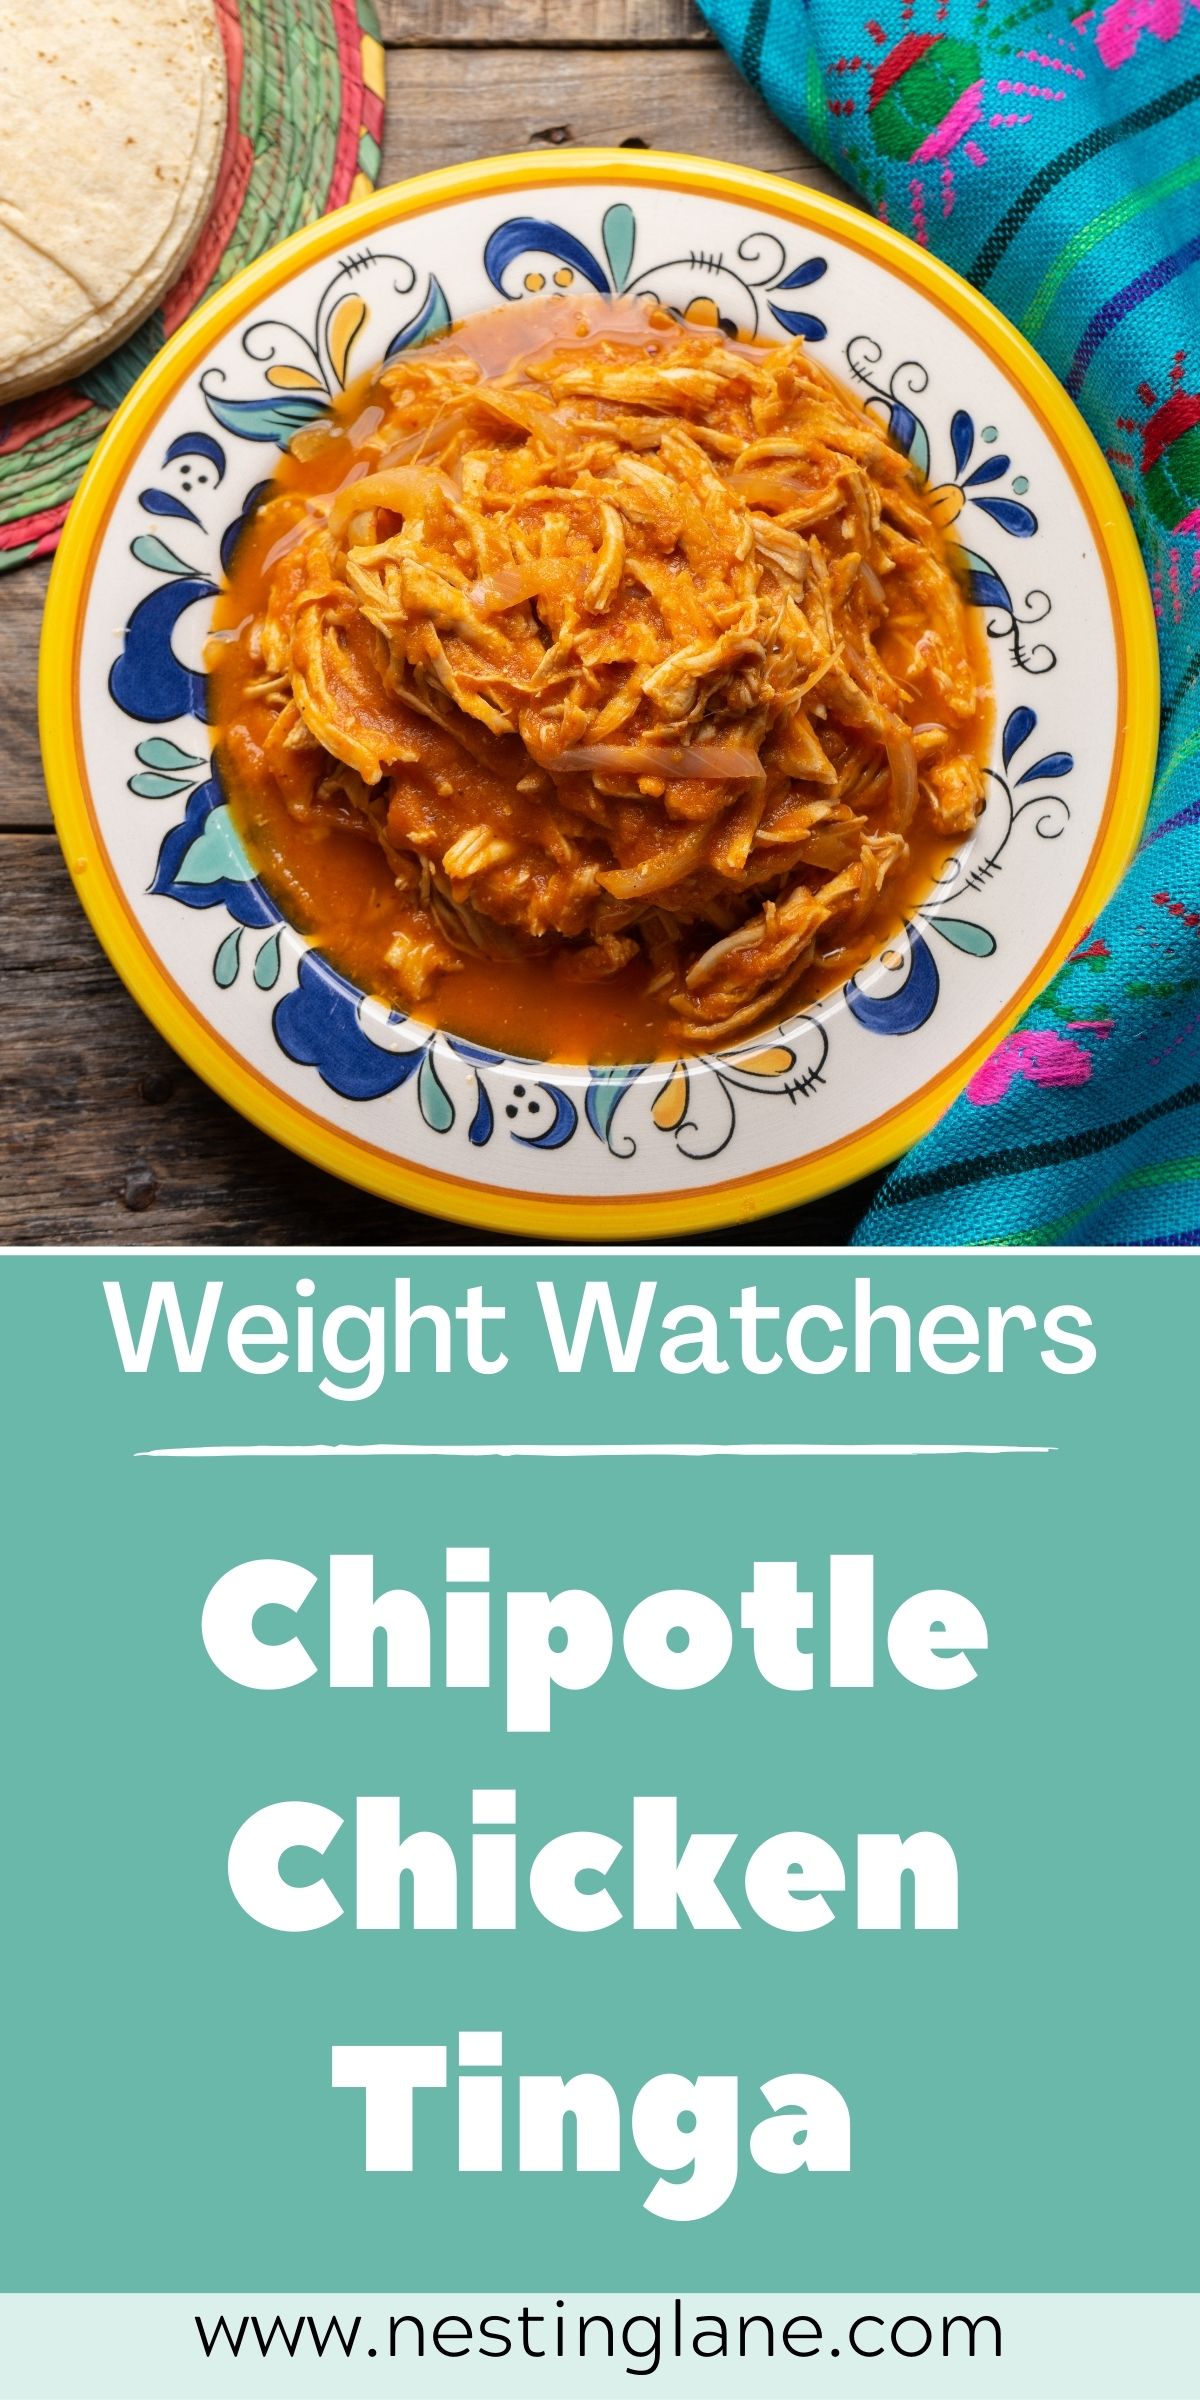 Graphic for Pinterest of Weight Watchers Chipotle Chicken Tinga Recipe.